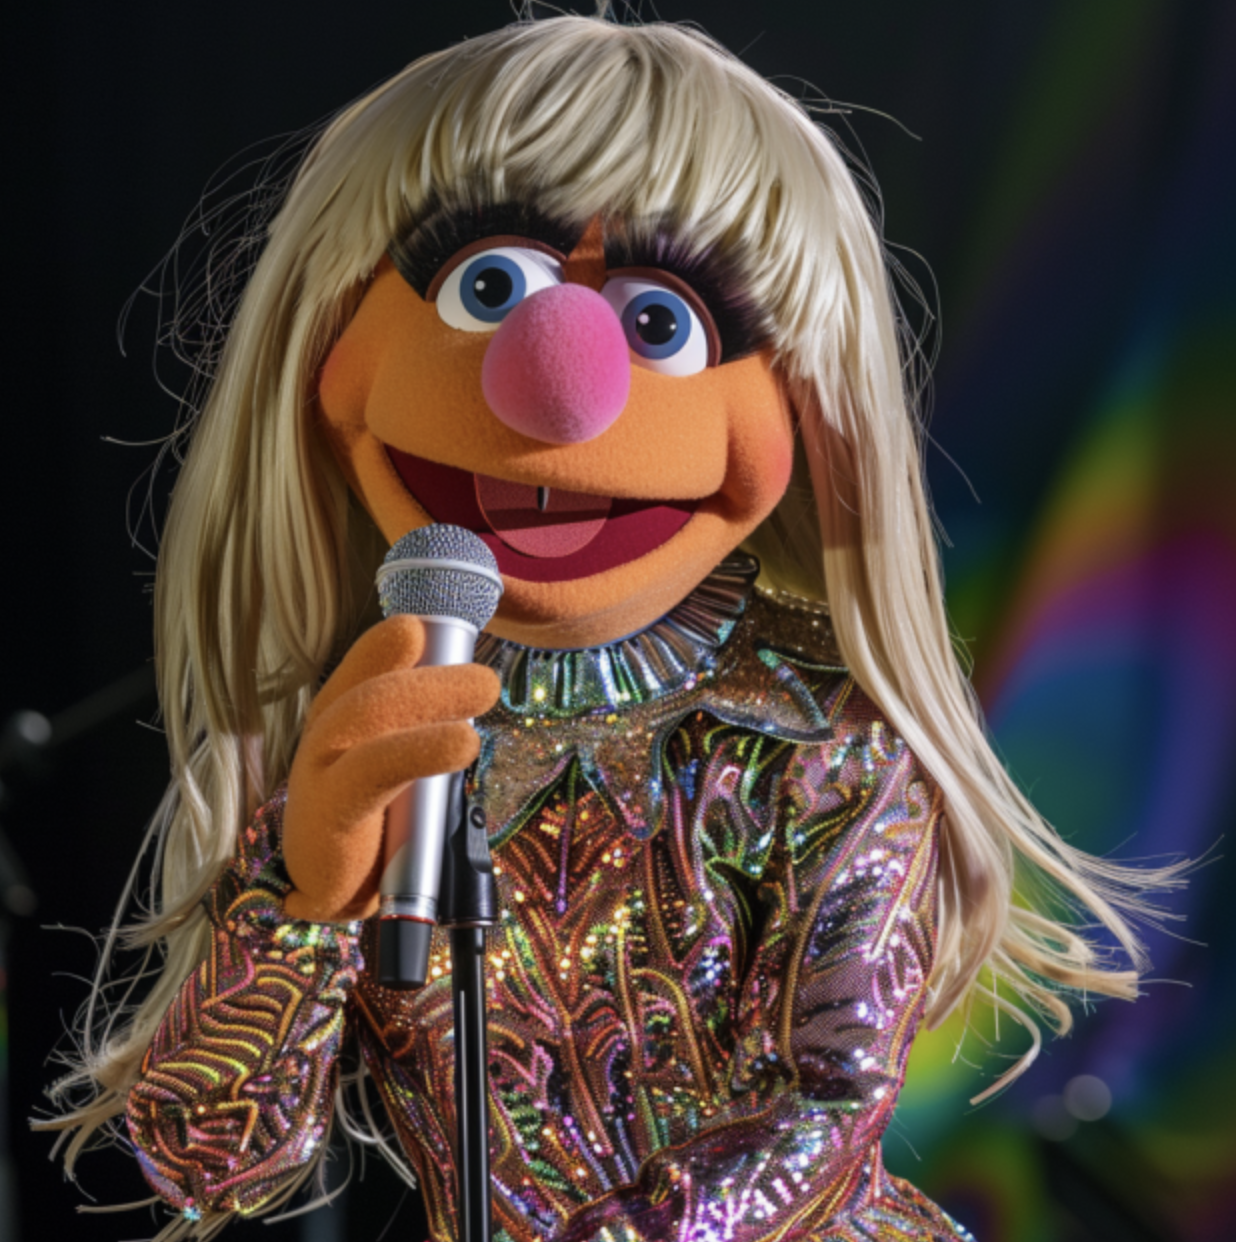 Muppet Taylor in a sparkling outfit holding a microphone, appearing to sing